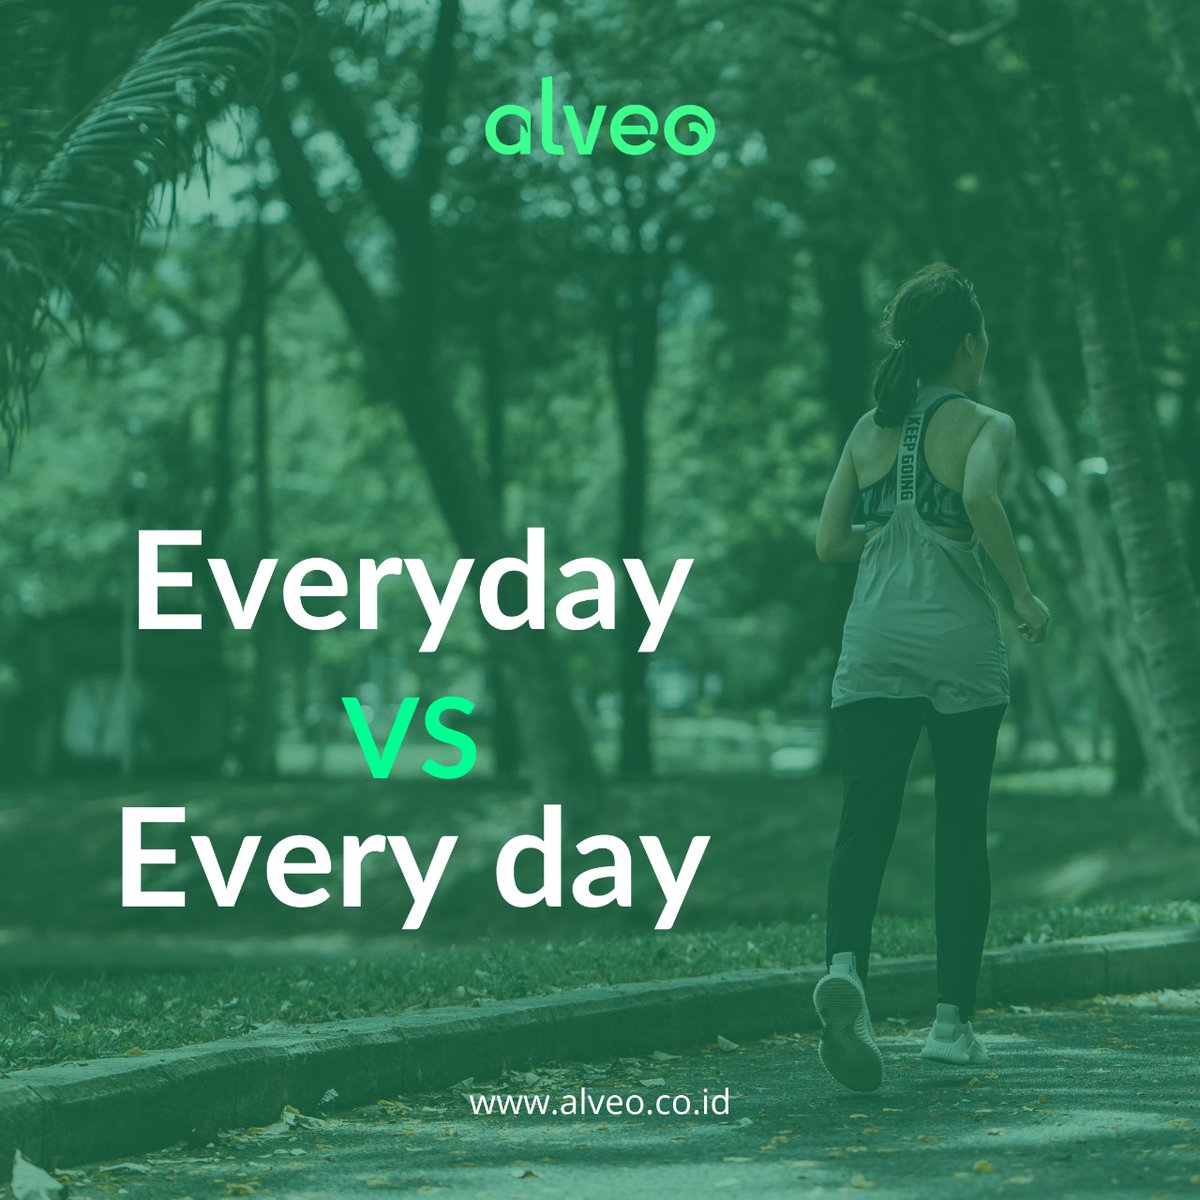 'Everyday' is an adjective that signifies ordinary. Examples: everyday routine, everyday clothes. 'Every day' is an adverbial phrase meaning each day. Examples: I go for a walk every day, I eat breakfast every day. In this usage, 'every' modifies 'day' to indicate frequency.